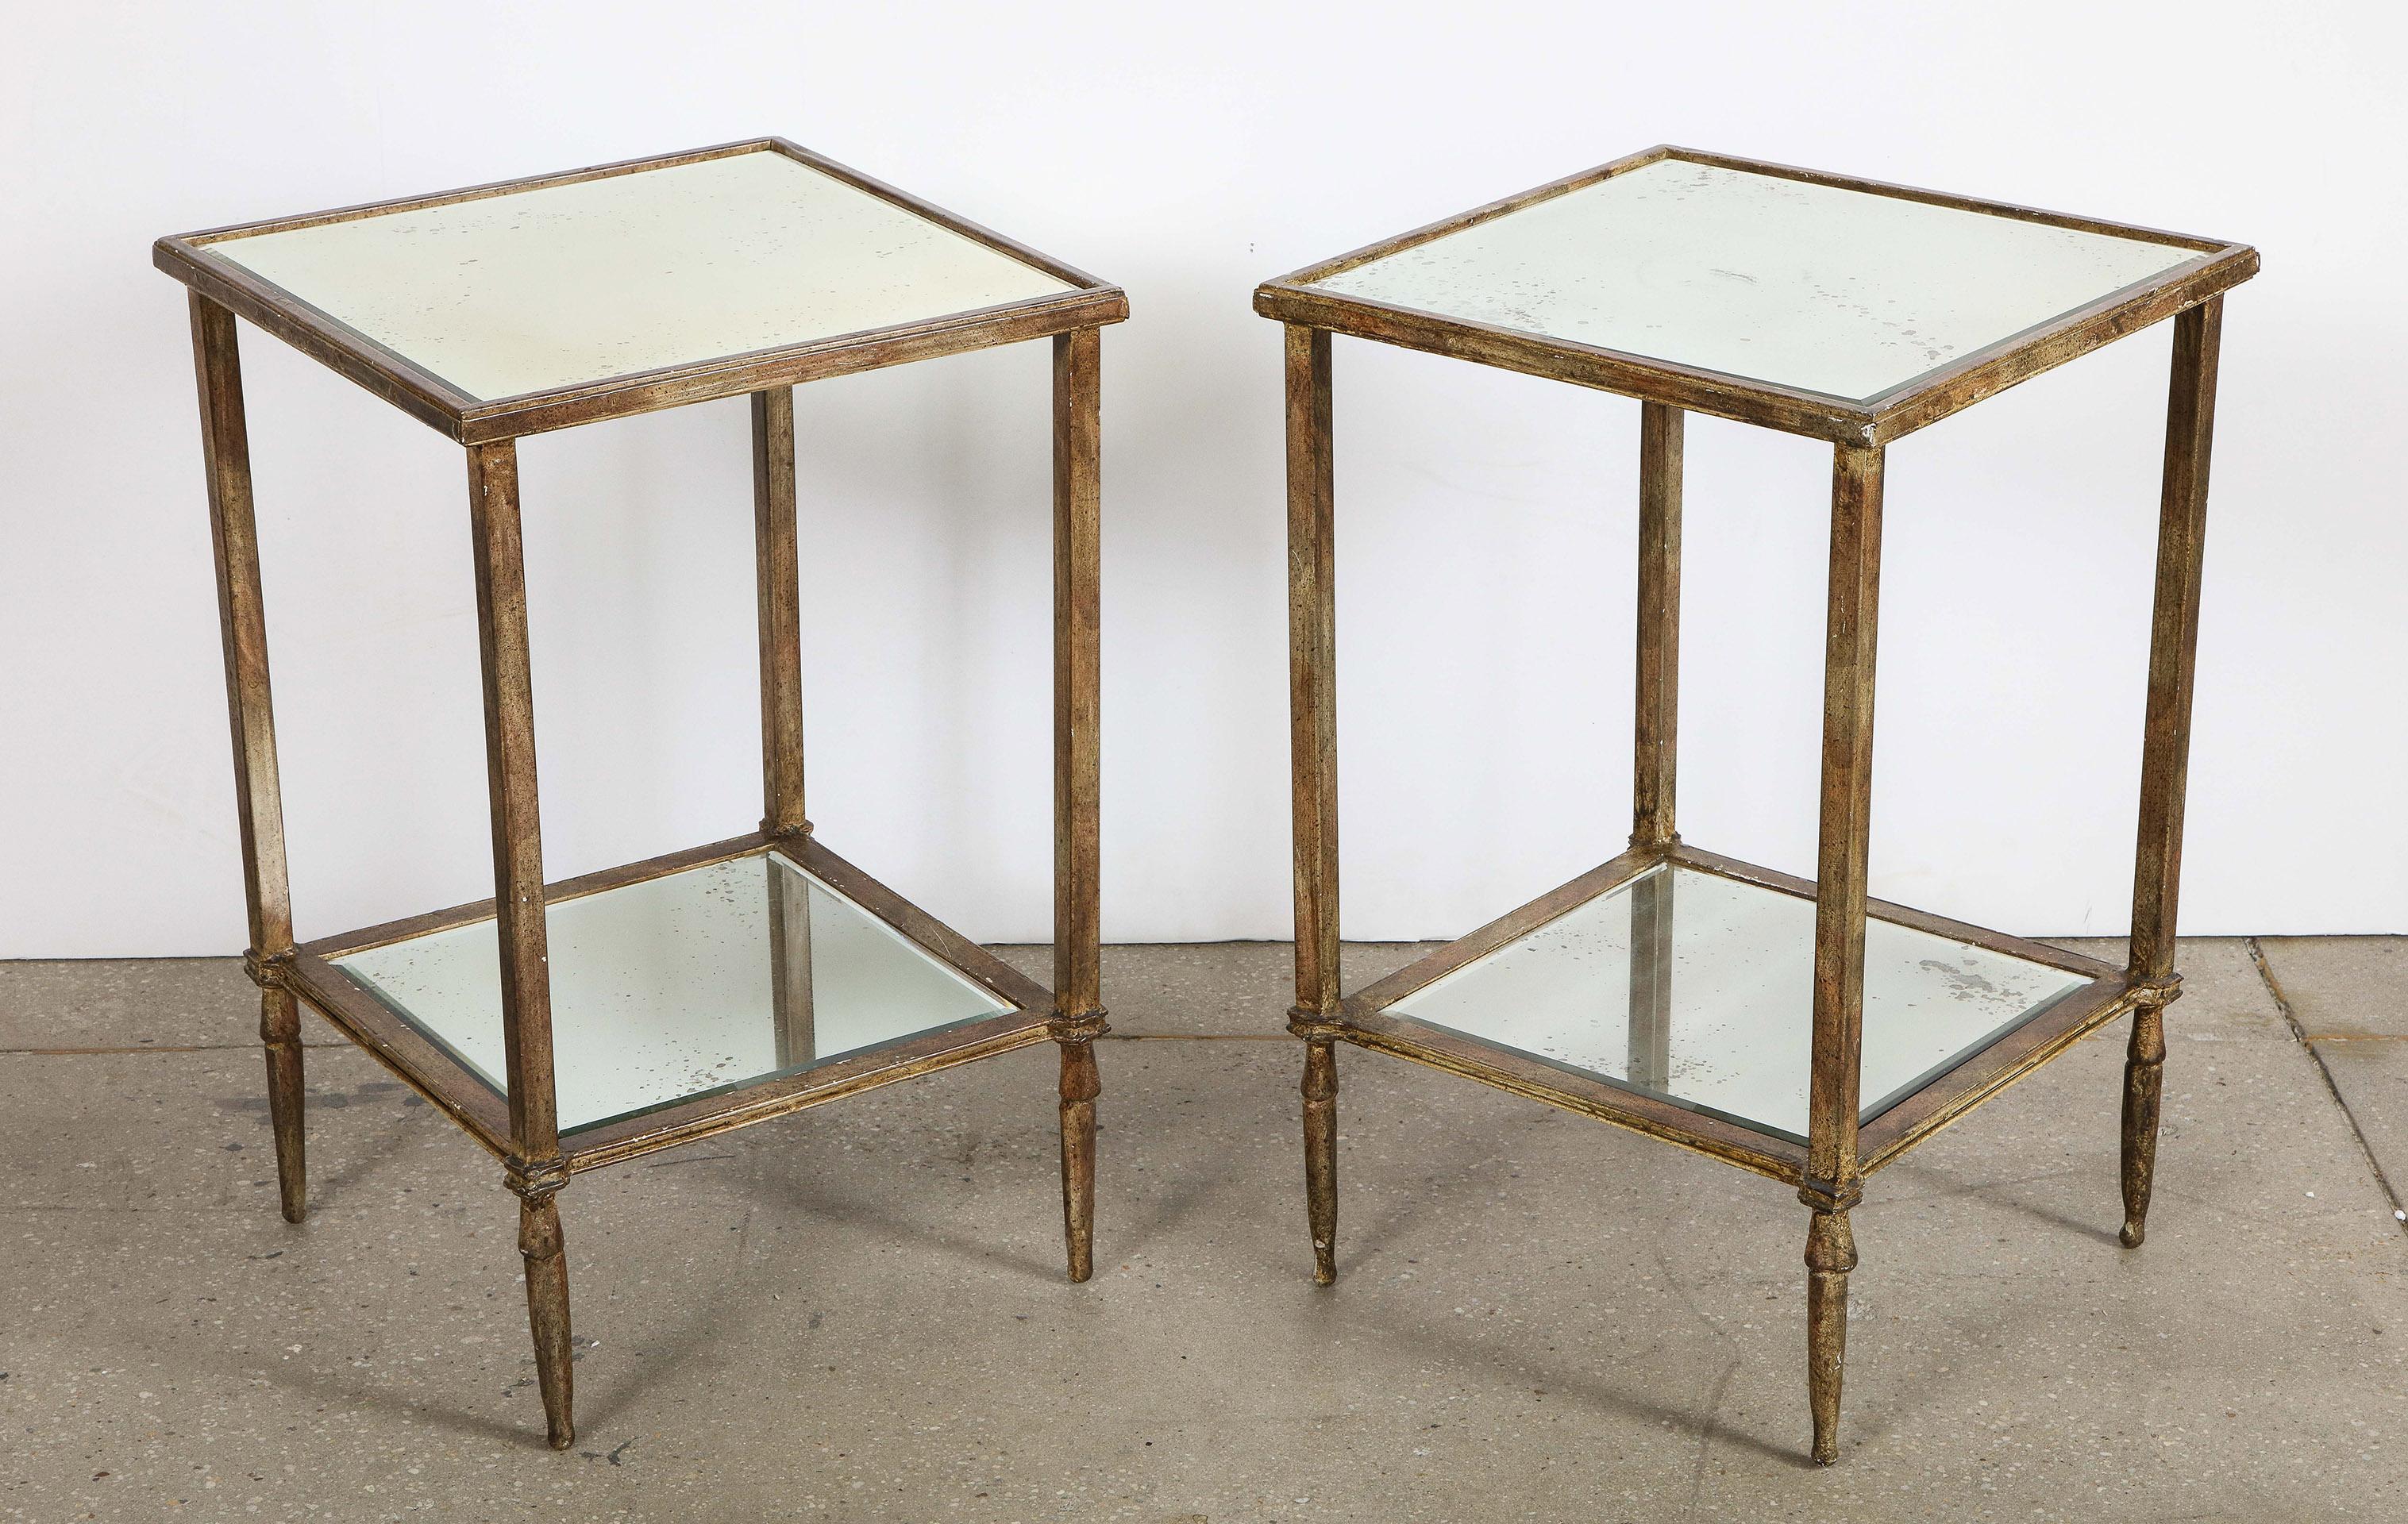 Pair of painted iron and mirrored tables

The painted iron frame with two mirrored shelves.